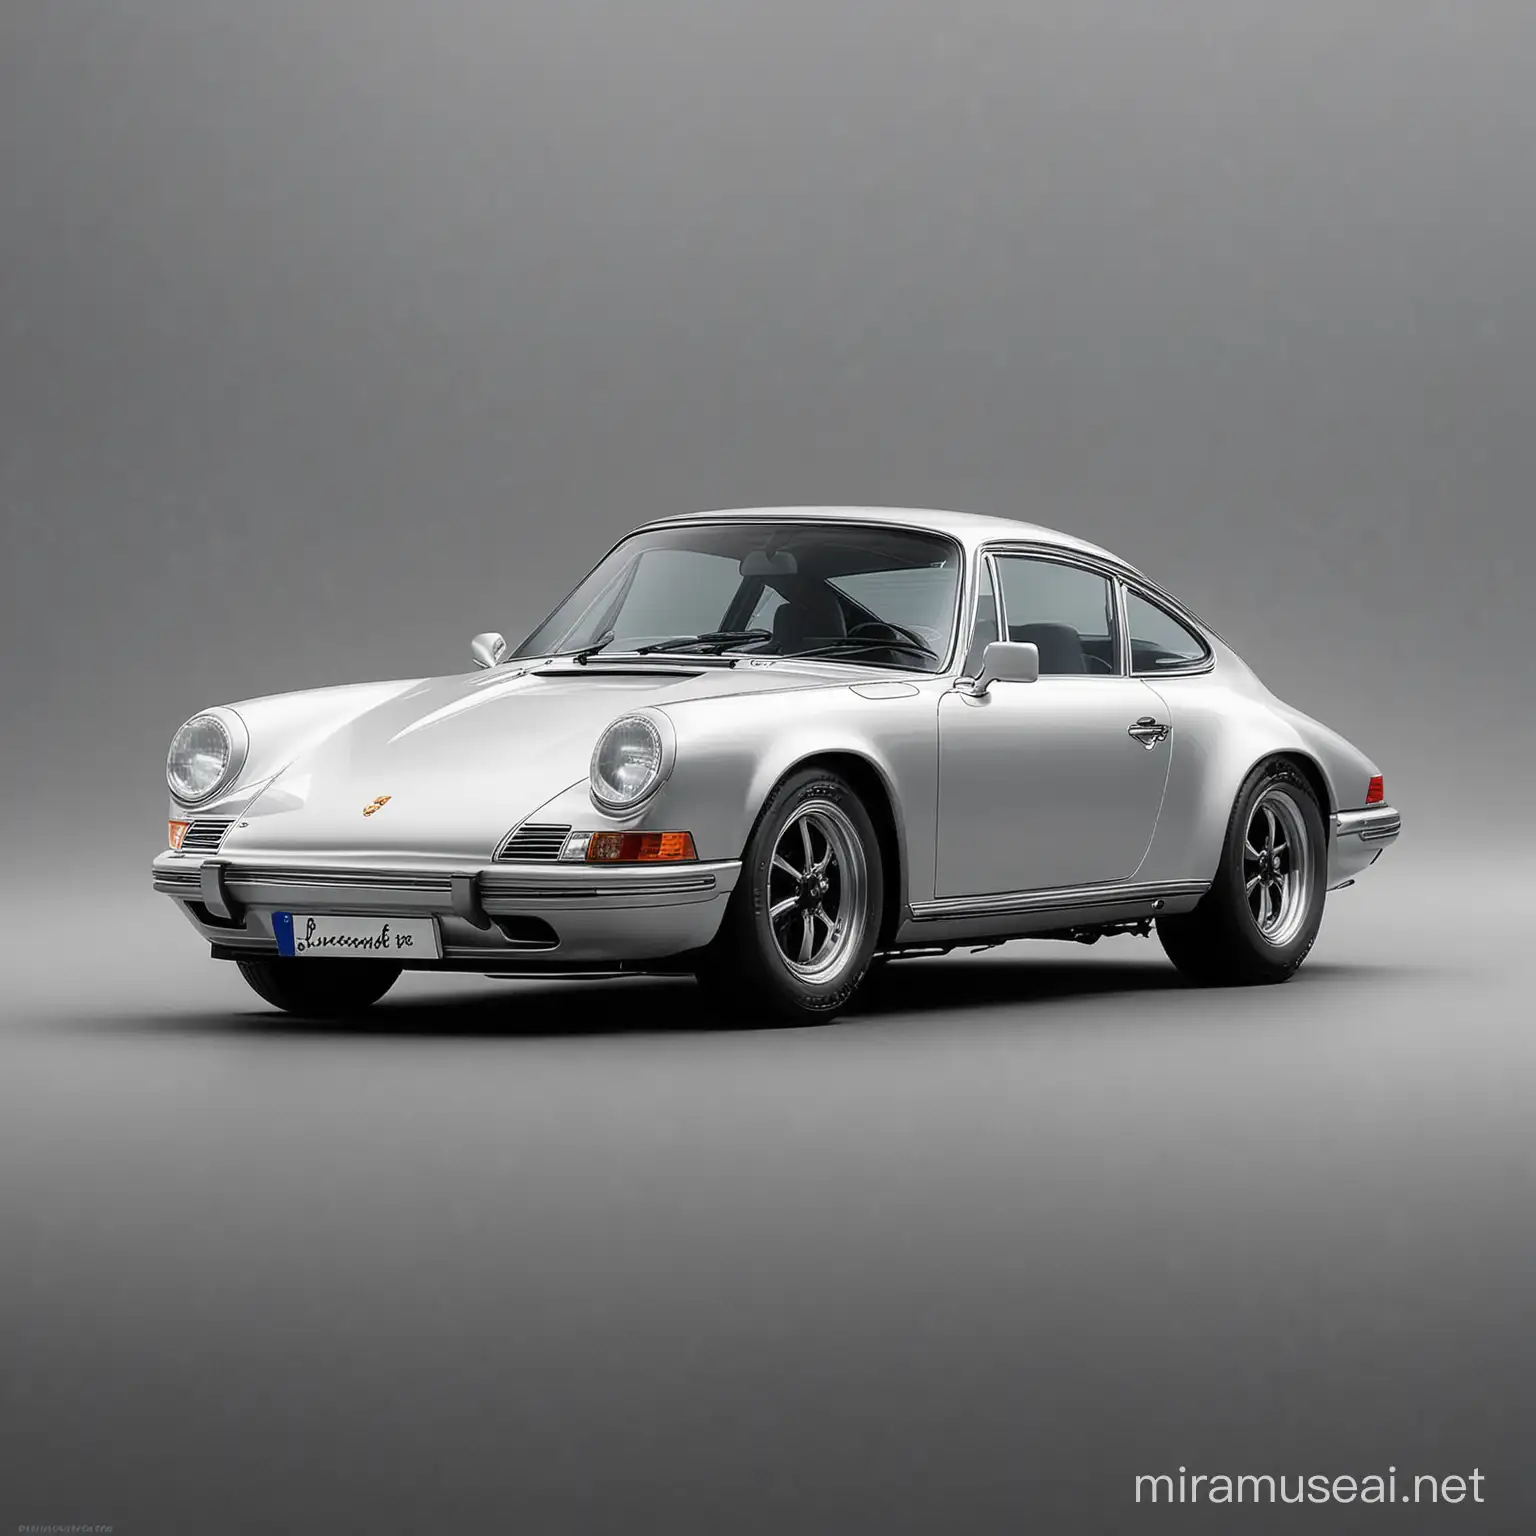 Title: "Sleek Silver Serenity: Porsche 911 (964)"

Description: "Craft an exquisite portrayal of a silver Porsche 911 (964) that exudes elegance, sophistication, and timeless beauty. The focus is on capturing the essence of classic automotive design, highlighting the sleek curves and iconic silhouette of the Porsche. The scene should convey a sense of serenity and refinement, perhaps set against a backdrop of a scenic coastal road or a tranquil countryside. Soft lighting should accentuate the car's lustrous silver exterior, reflecting the surrounding environment with grace and poise. Let the artwork evoke a feeling of understated luxury and appreciation for the artistry of automotive engineering."





